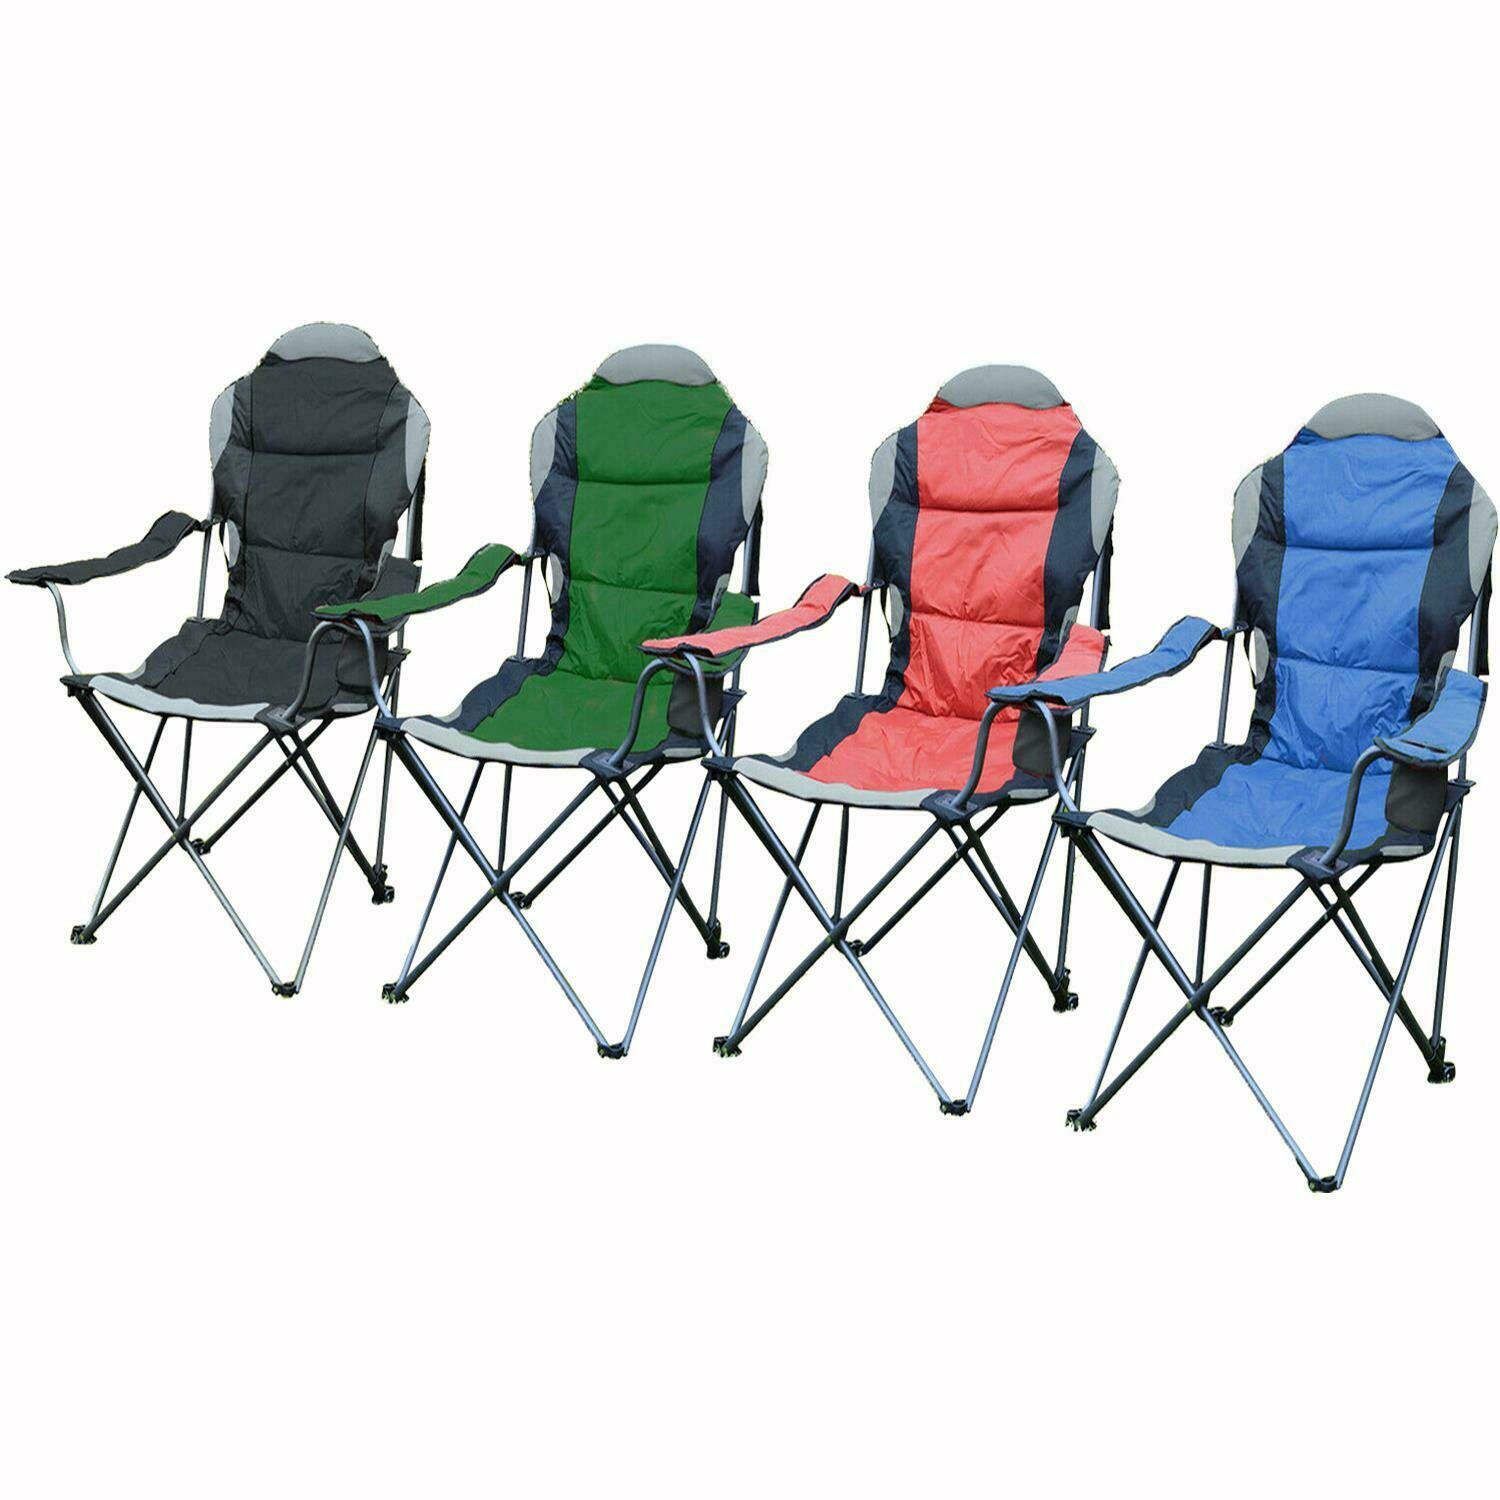 60x60x100CM Folding Camping Chair Heavy Duty Portable Fishing Chair Ultralight Beach Seat with Cup Holder